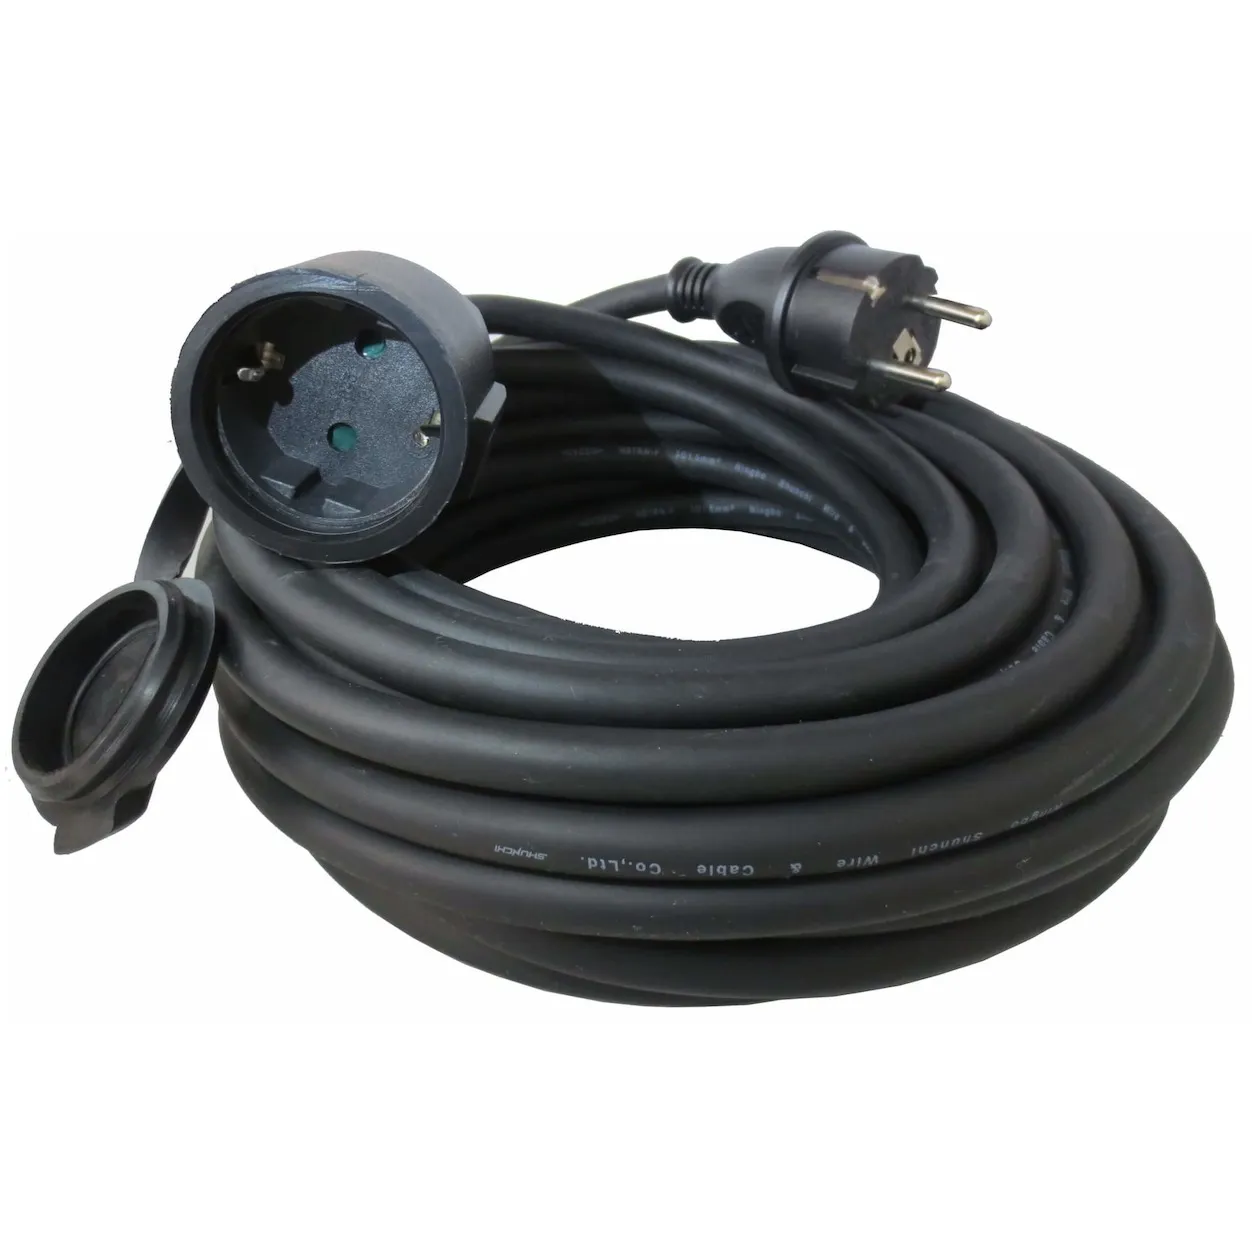 Eurom Extension cable 10m Patioheater accessories